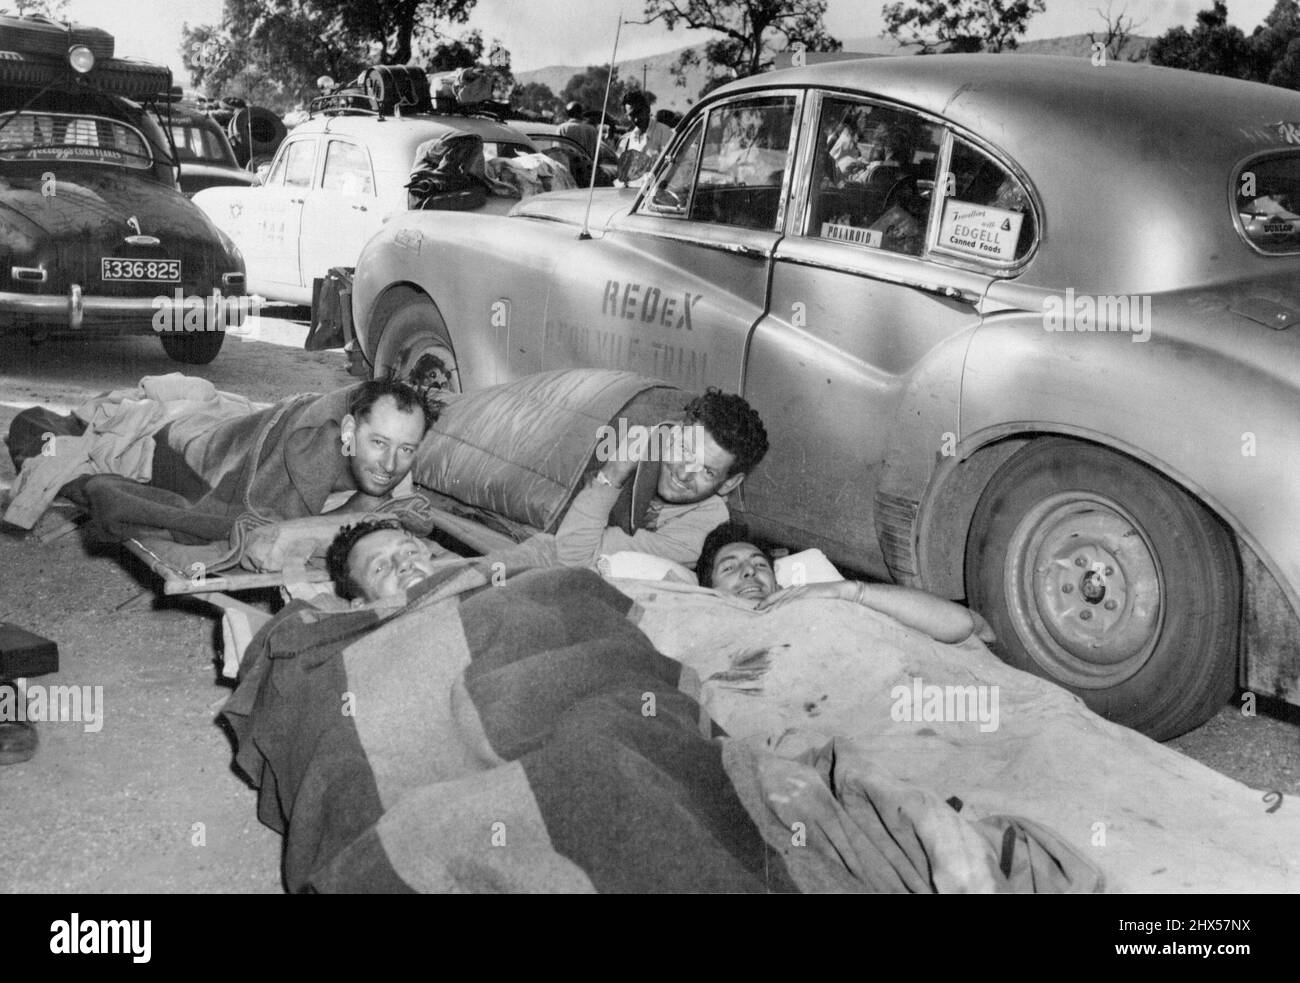 Tired, but still smiling -- Jaguar crews settle down to sleep beside their cars in the Alice Springs control area. The men are Noel Sweeney, Bob Hutchison, Eric Staples and Dan Mott. September 11, 1953. Stock Photo